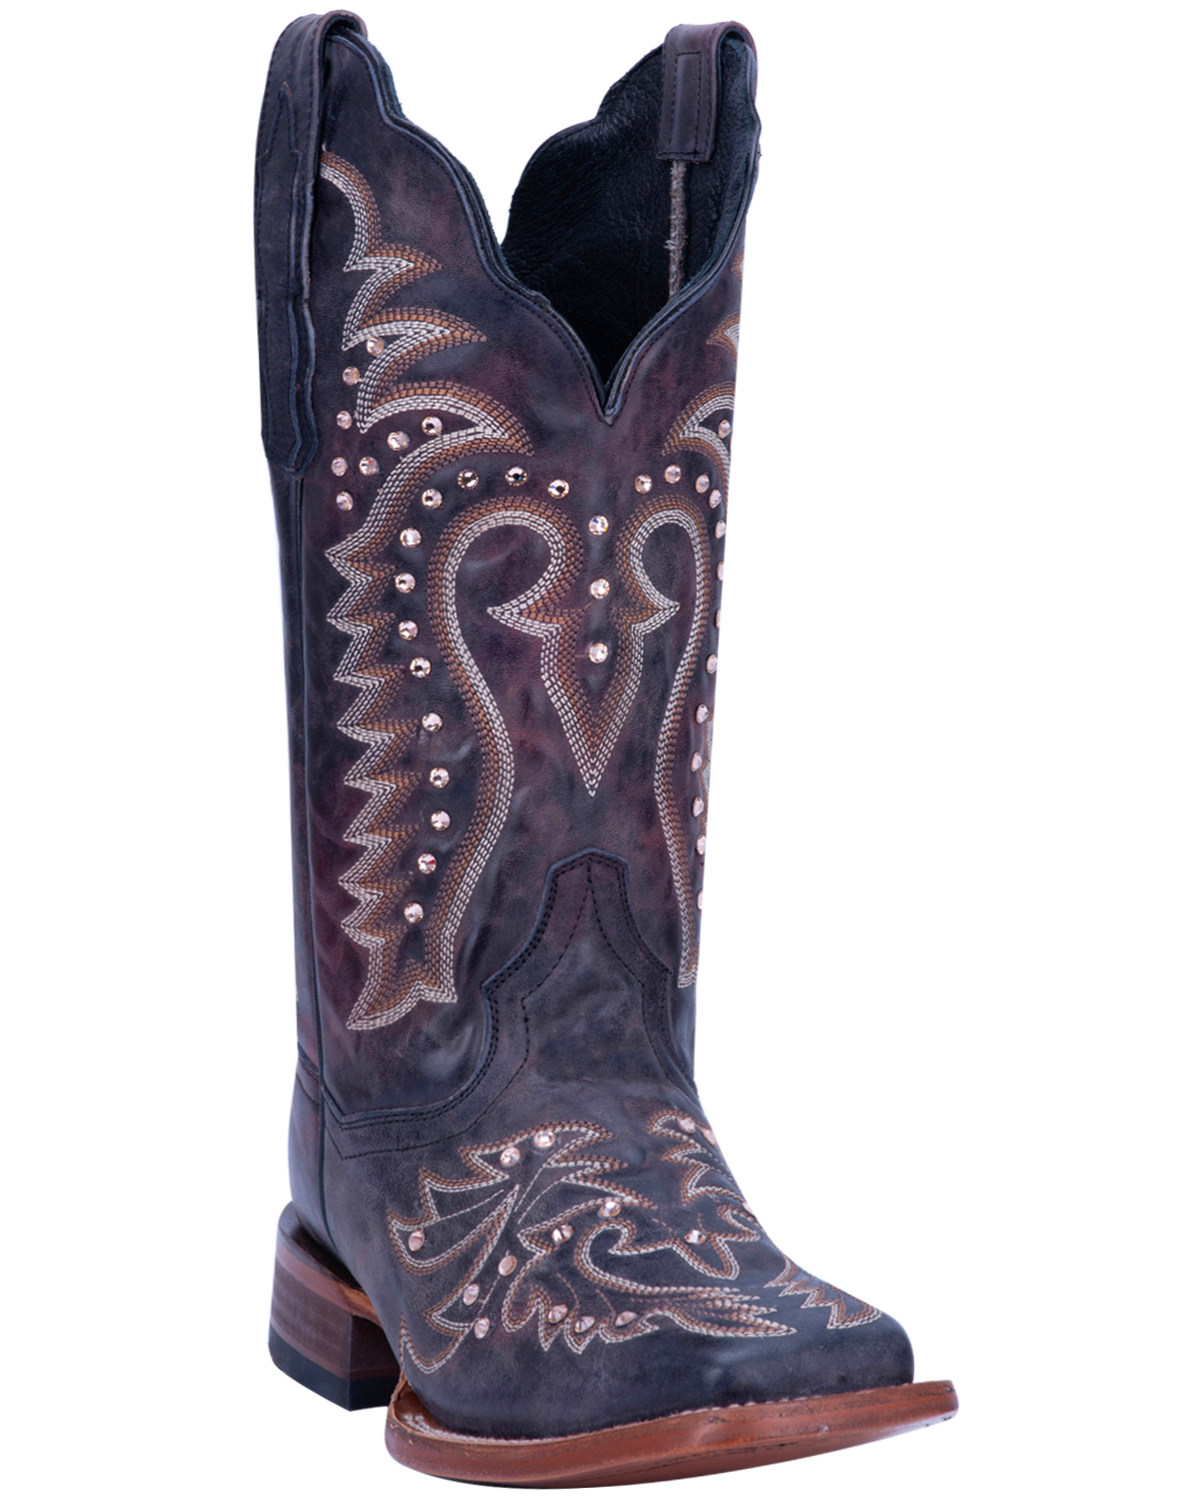 Western Boots - Wide Square Toe | Boot Barn